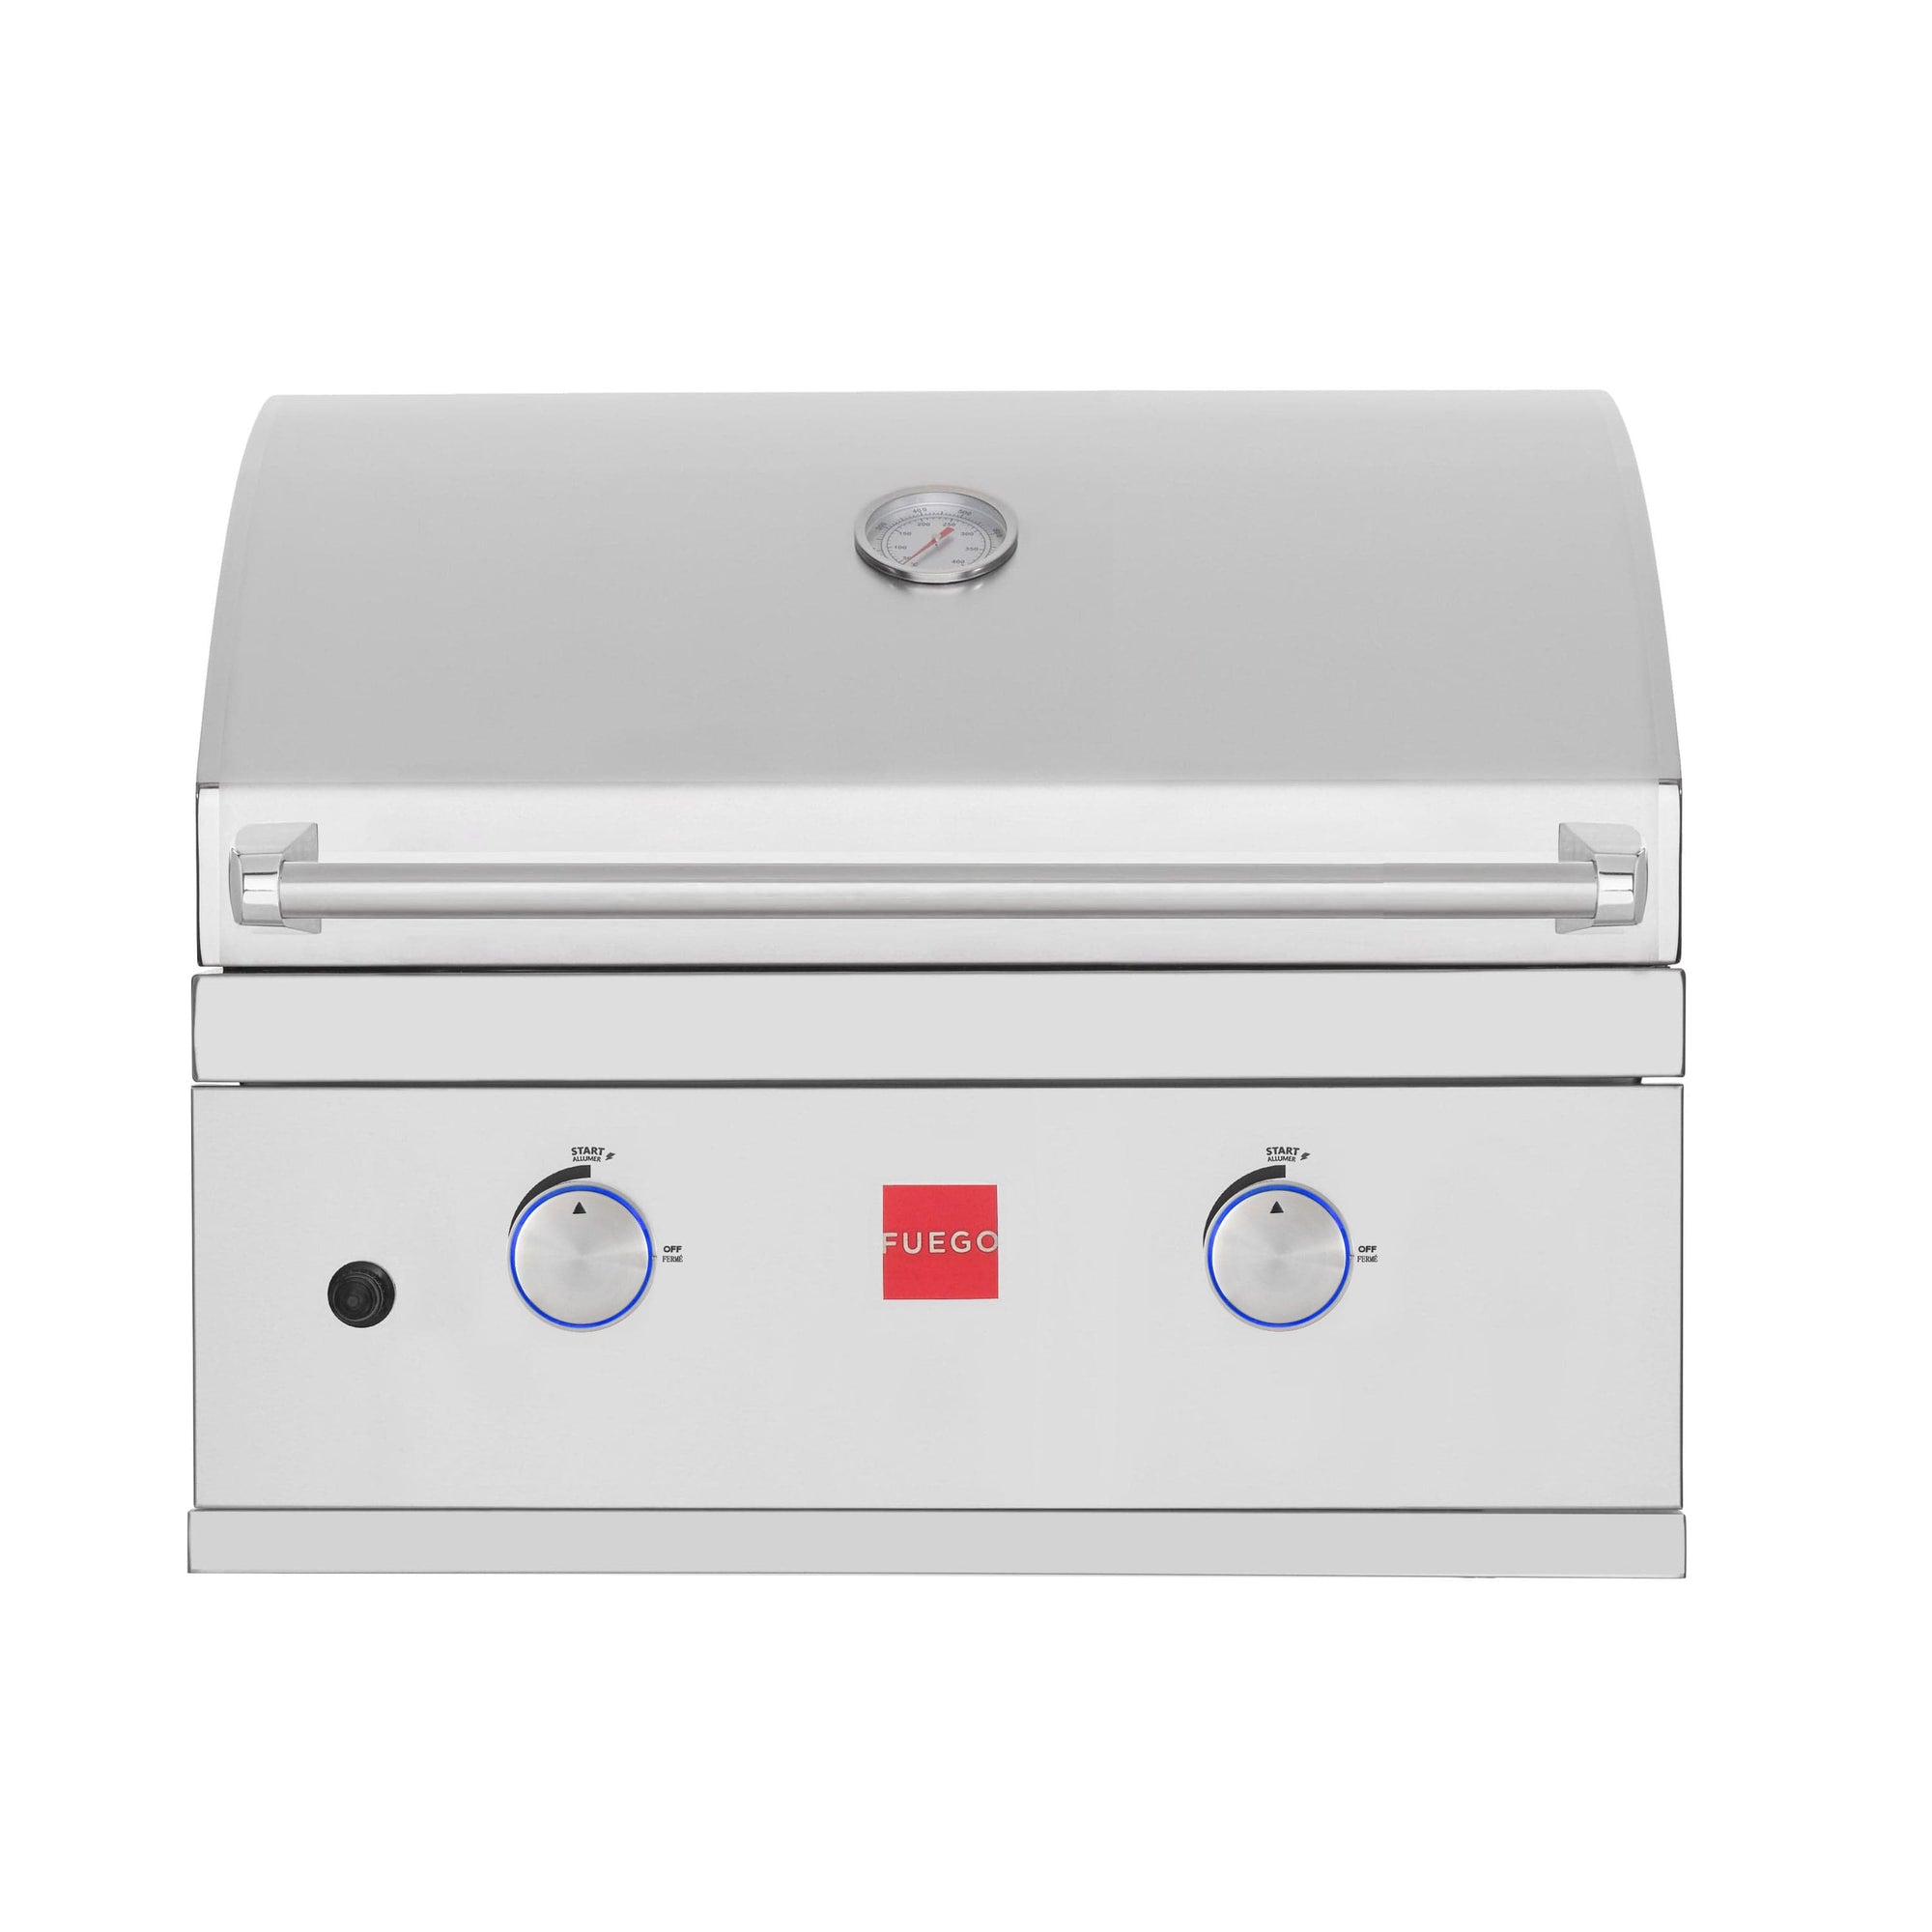 Fuego Grills Fuego 27” Built-In Gas Grill / Stainless Steel / F27S-B or F27S-B-NG